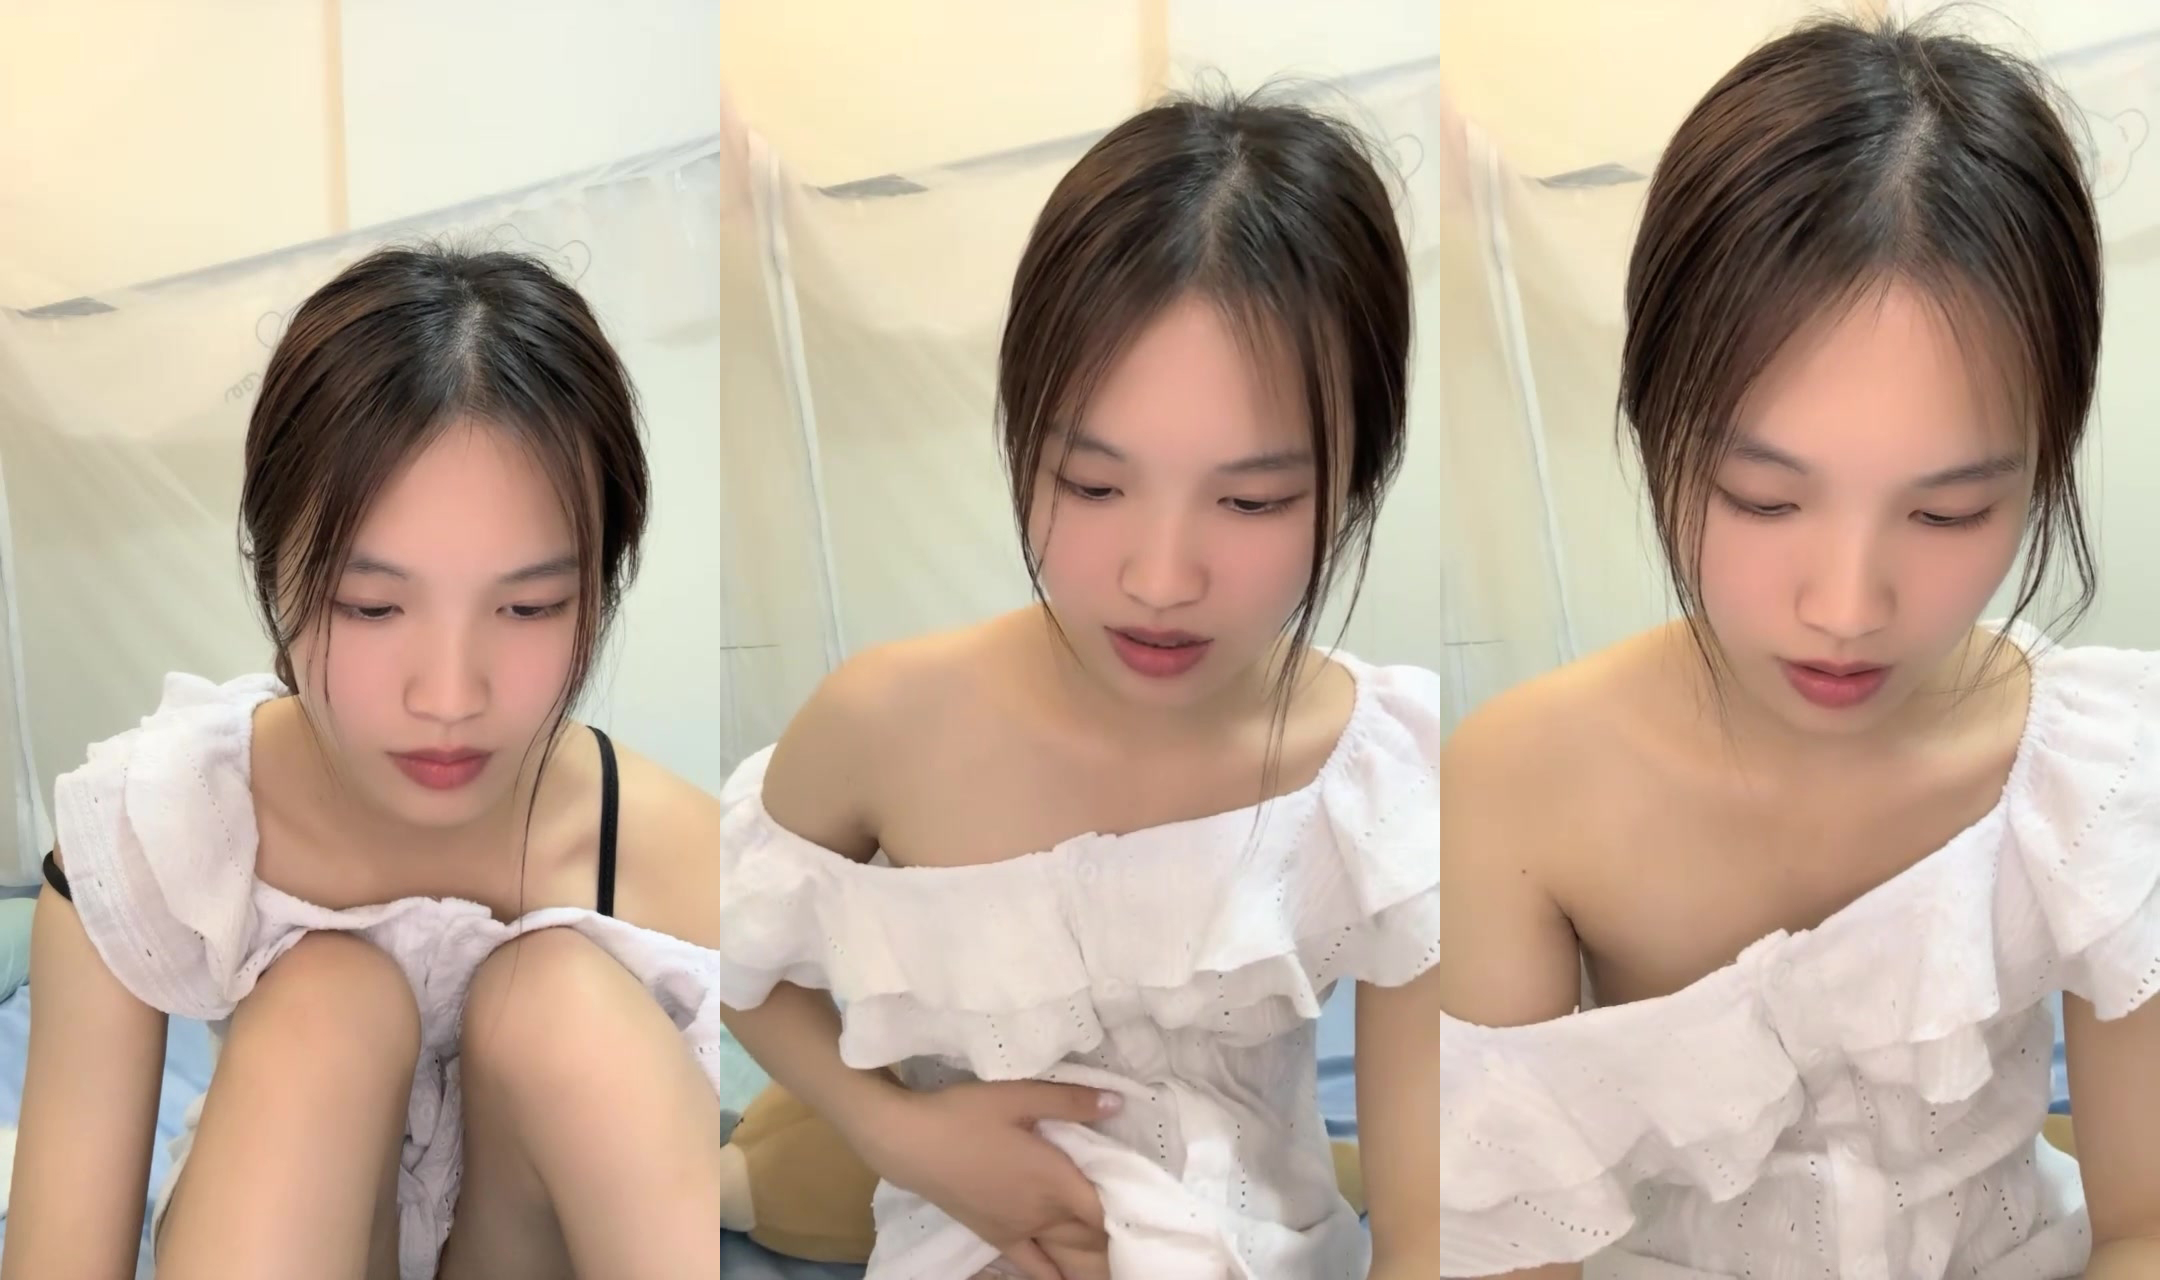 The Neighborhood Goddess's Kinky Side You, [Peach Fish], Pure and Shy, Fucked by Boyfriend for Days (3)